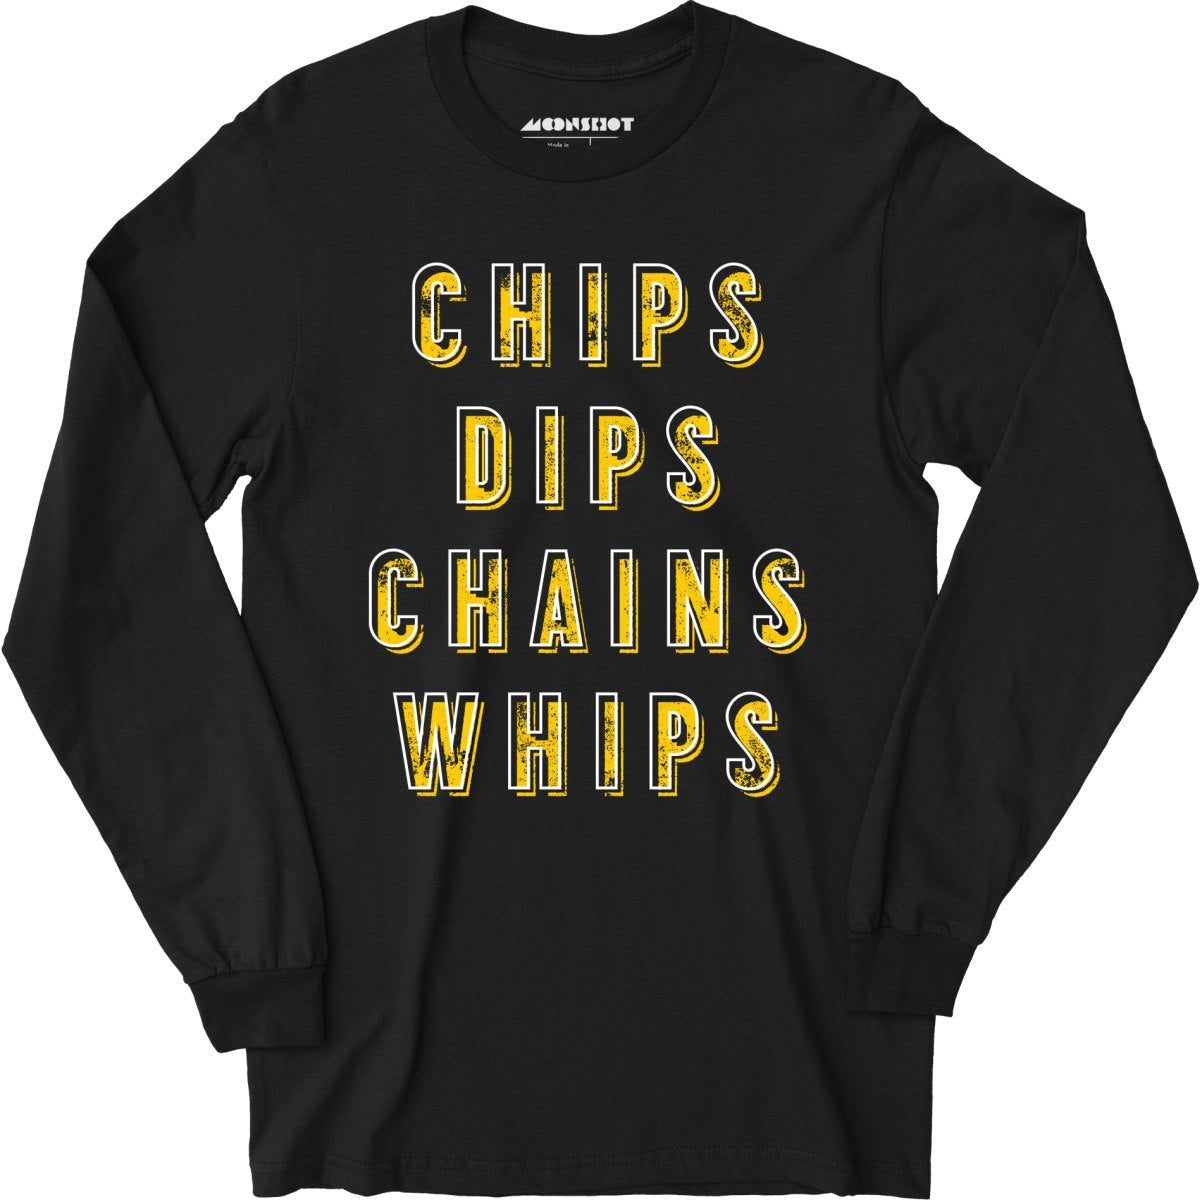 Chips Dips Chains Whips - Long Sleeve T-Shirt